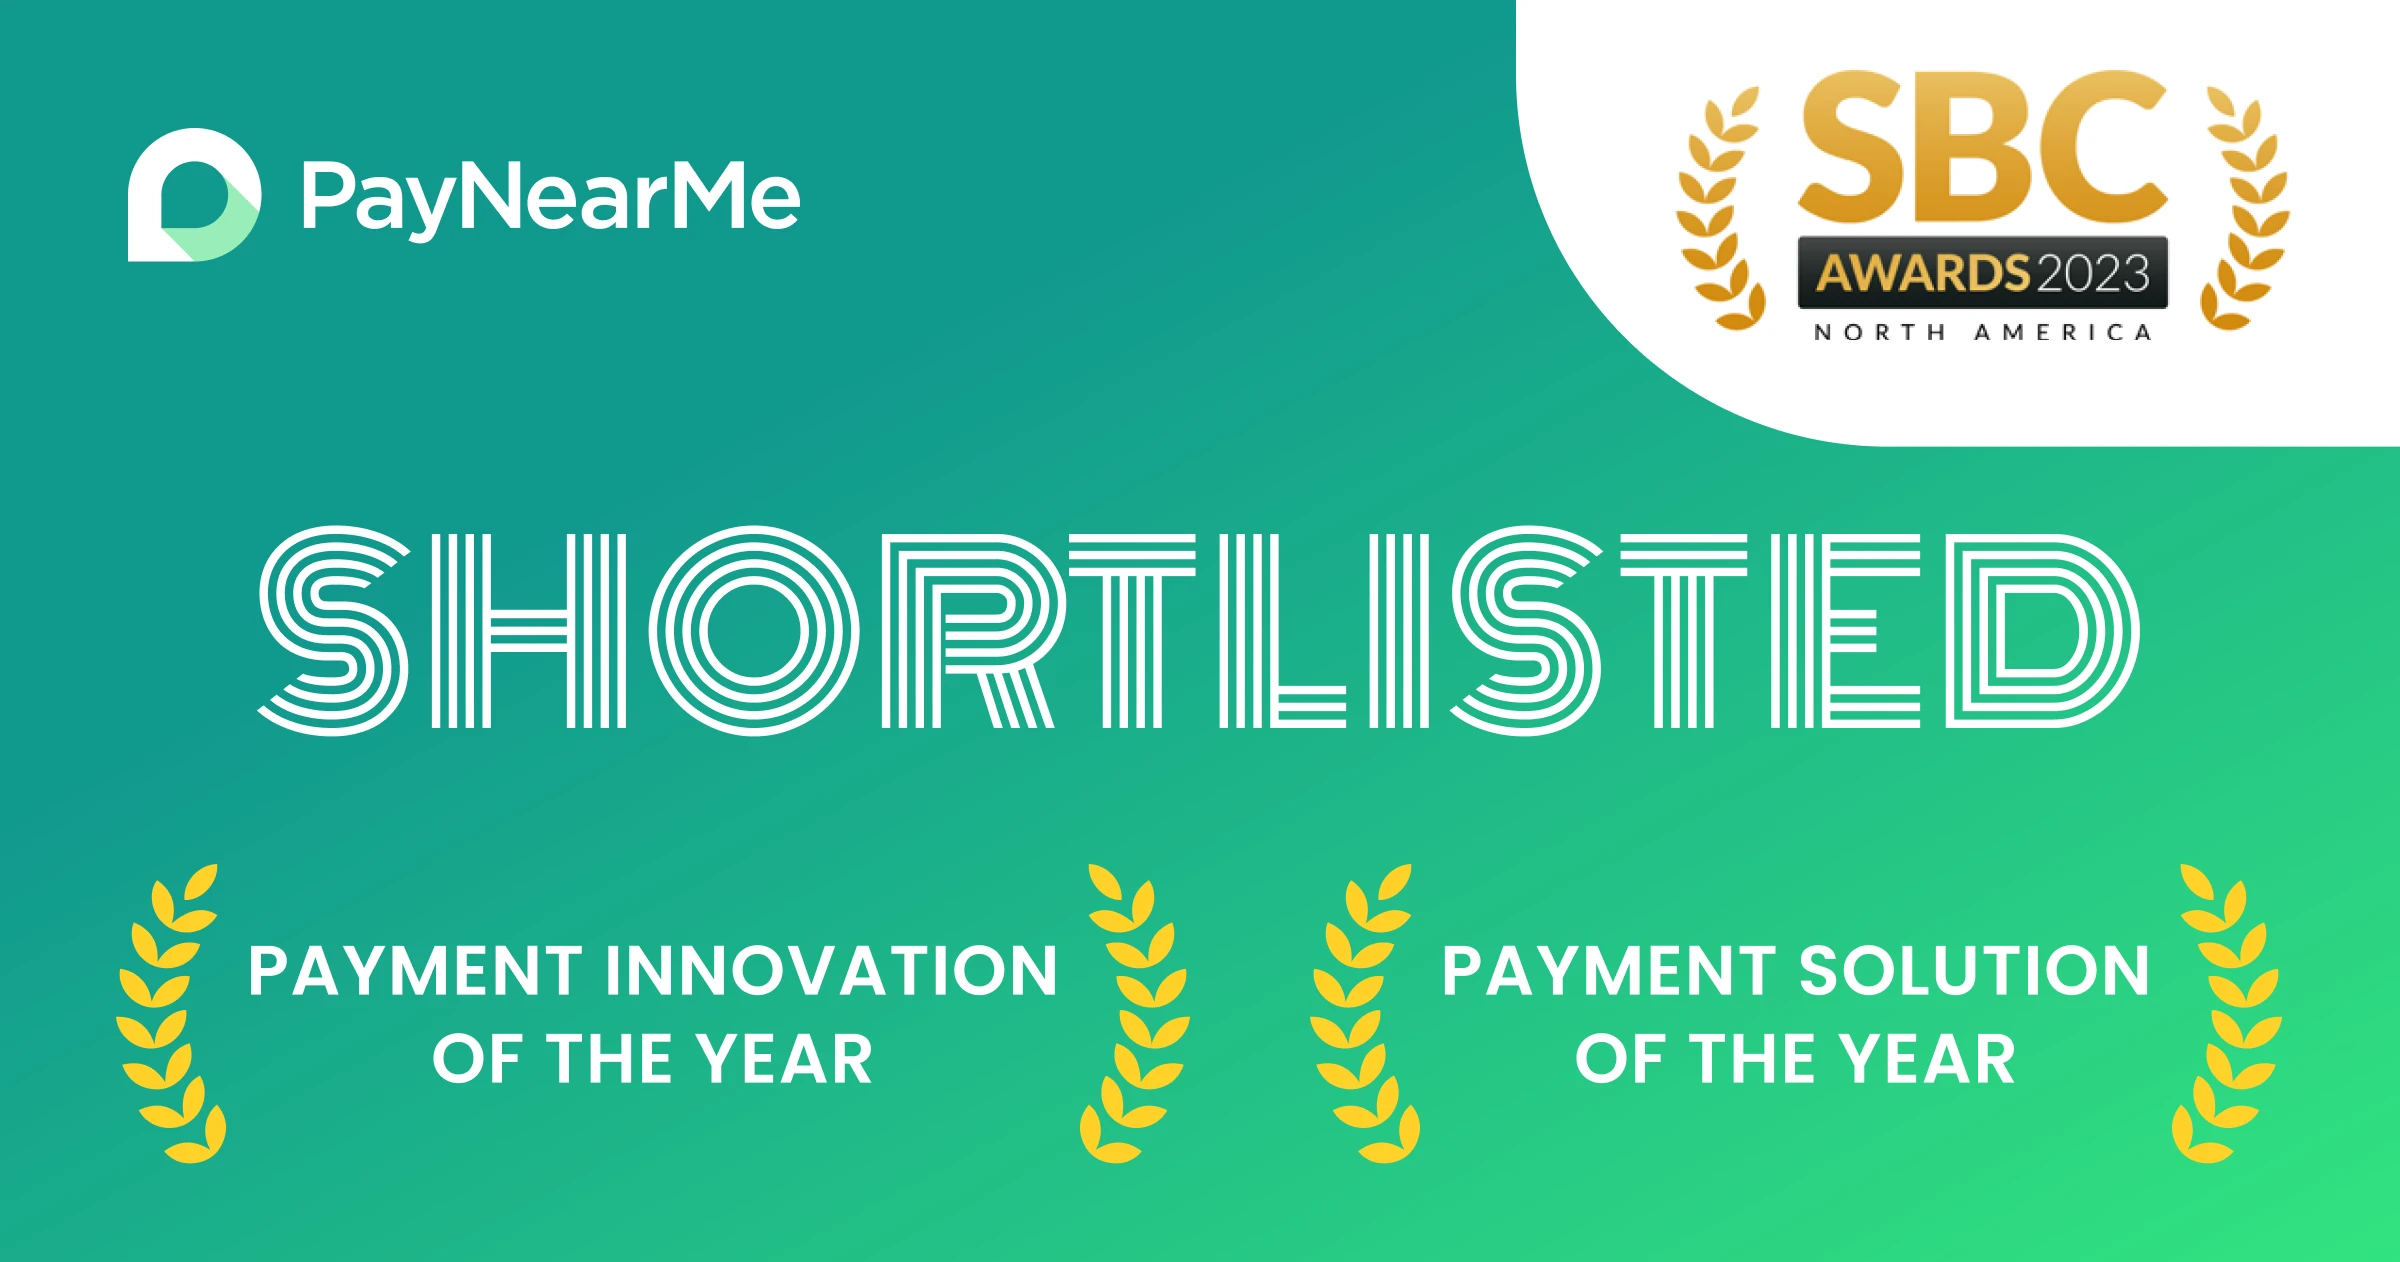 PayNearMe’s MoneyLine Platform Shortlisted for Two Major SBC Payment Awards—Here’s Why